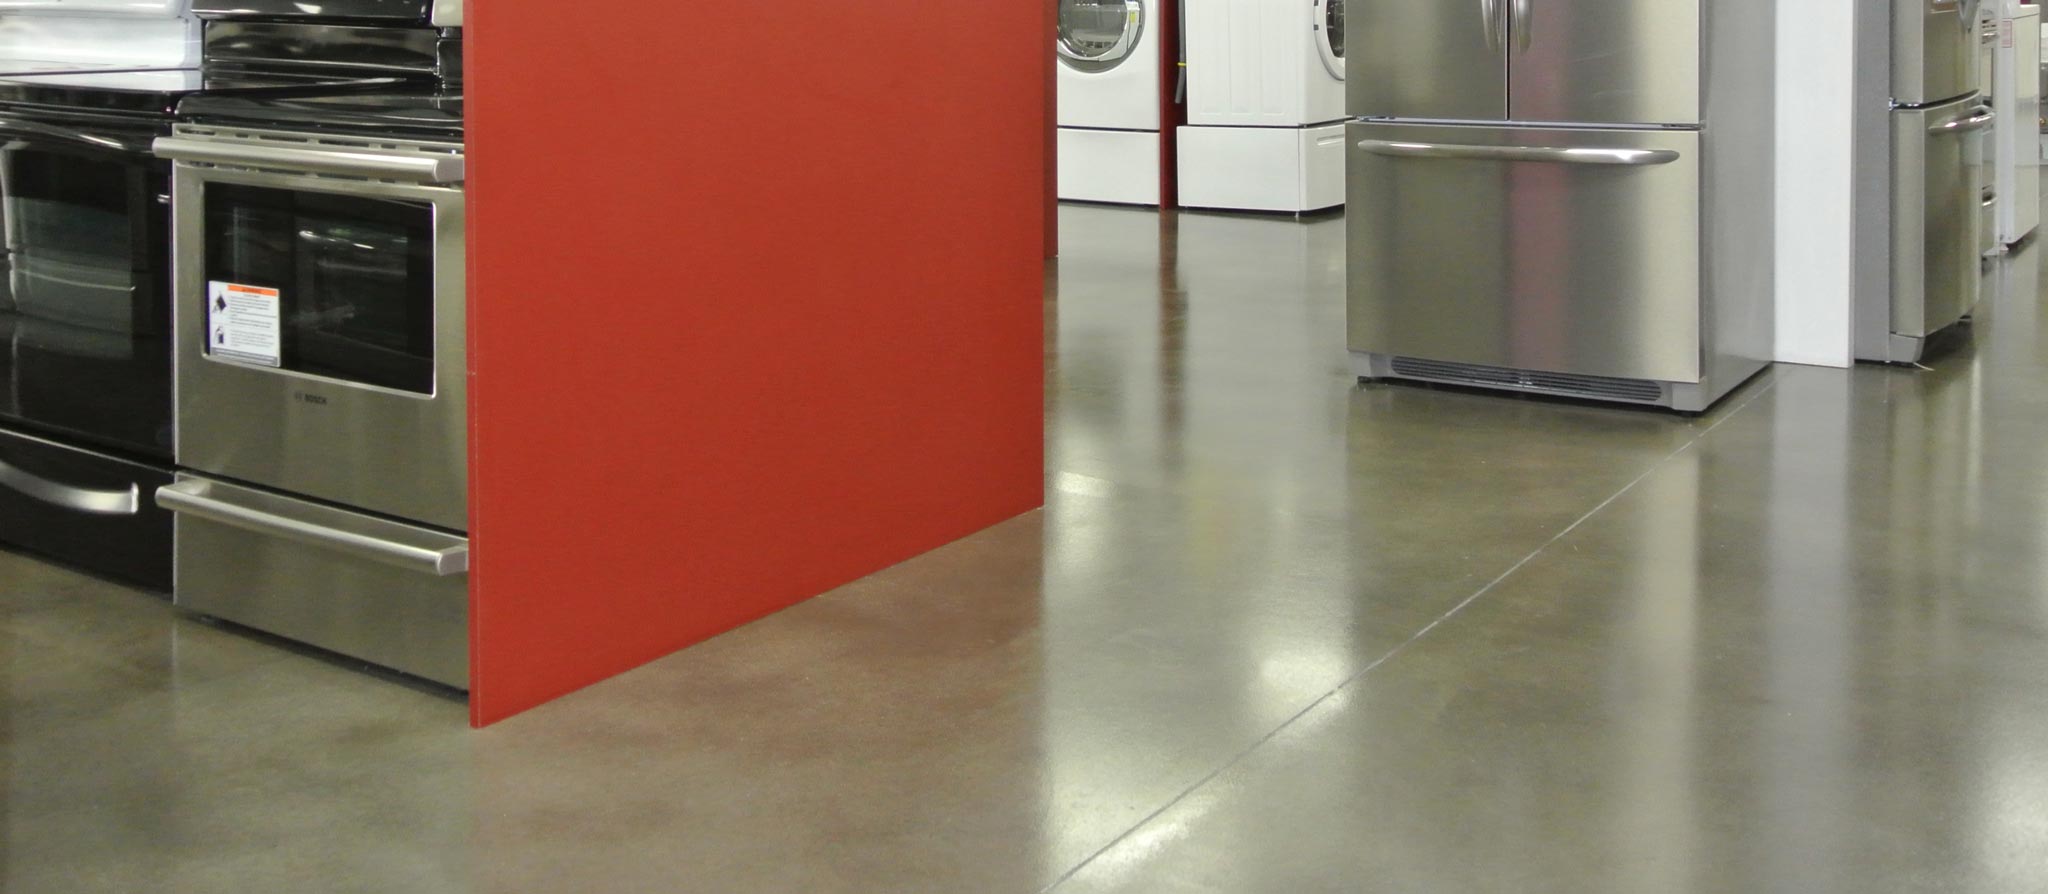 Brubaker Appliance Center polished concrete floor 02 Looking for Inexpensive Polished Concrete Just Grind Seal | Duraamen Engineered Products Inc